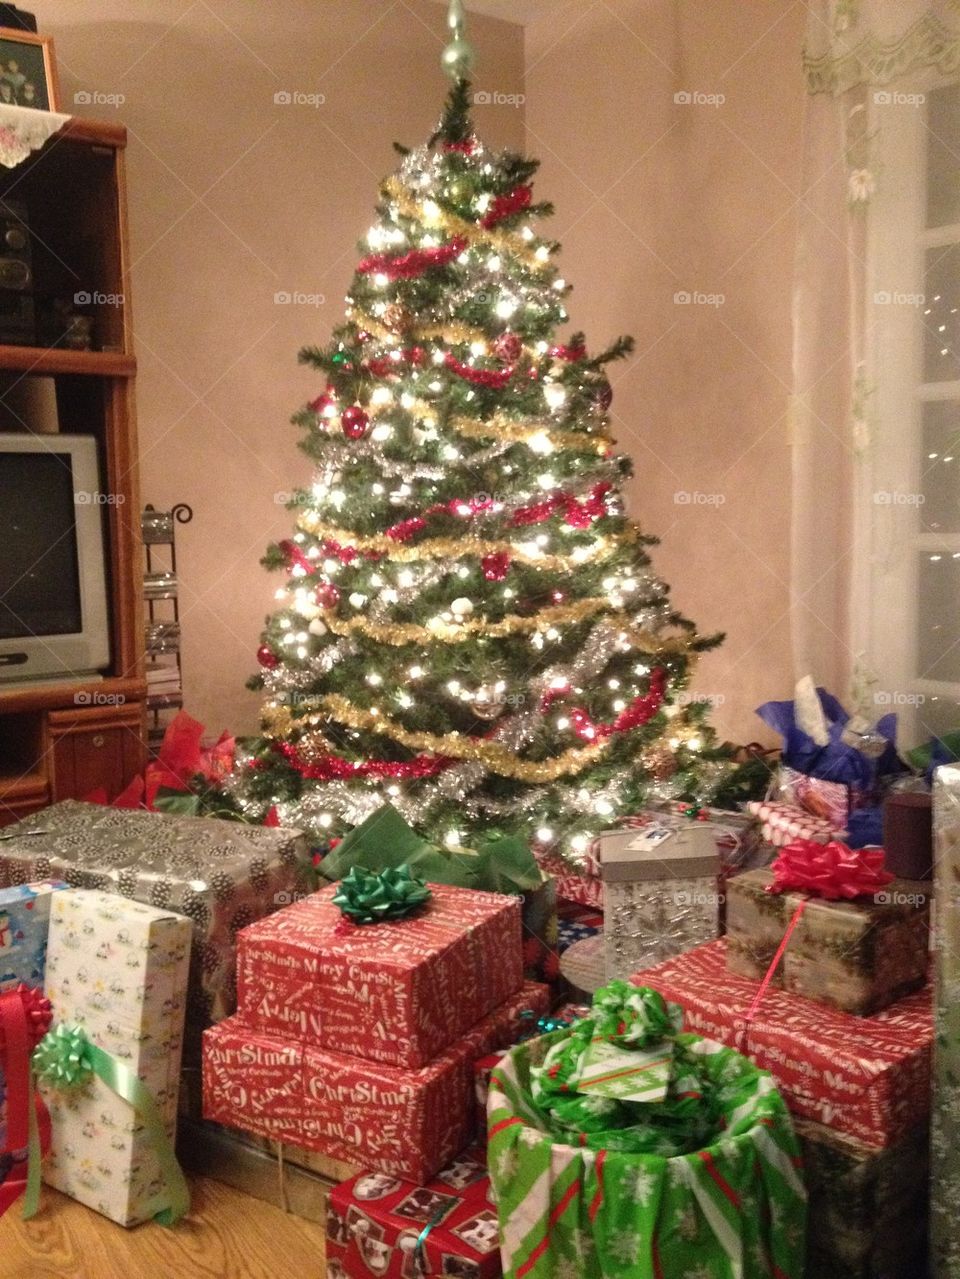 Celebrating Christmas at parents home with whole family.. Our Christmas tree with presents. 